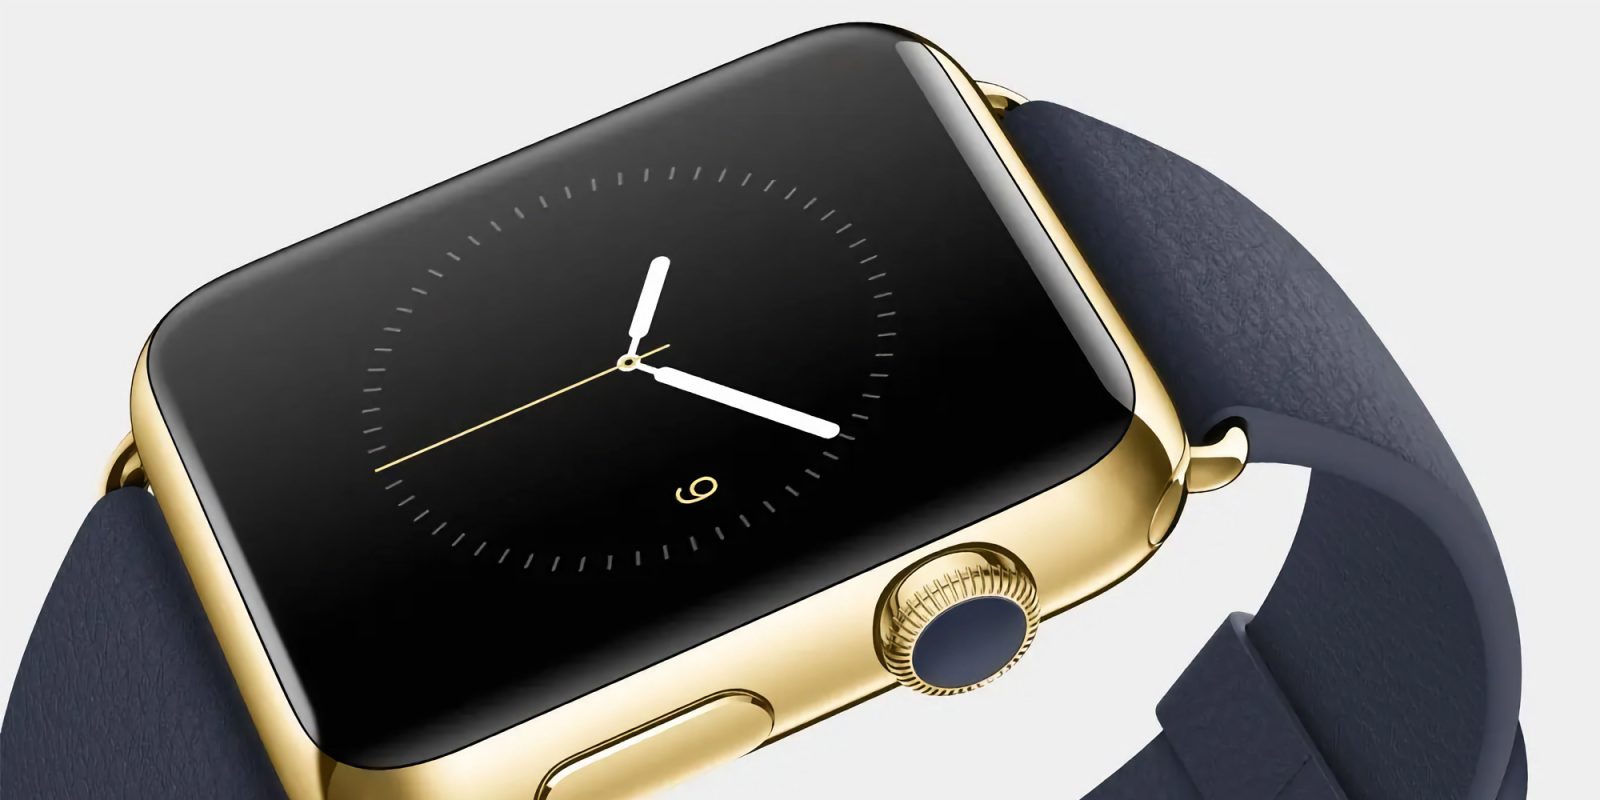 Original Apple Watch no longer eligible for repairs, including $17,000 gold model